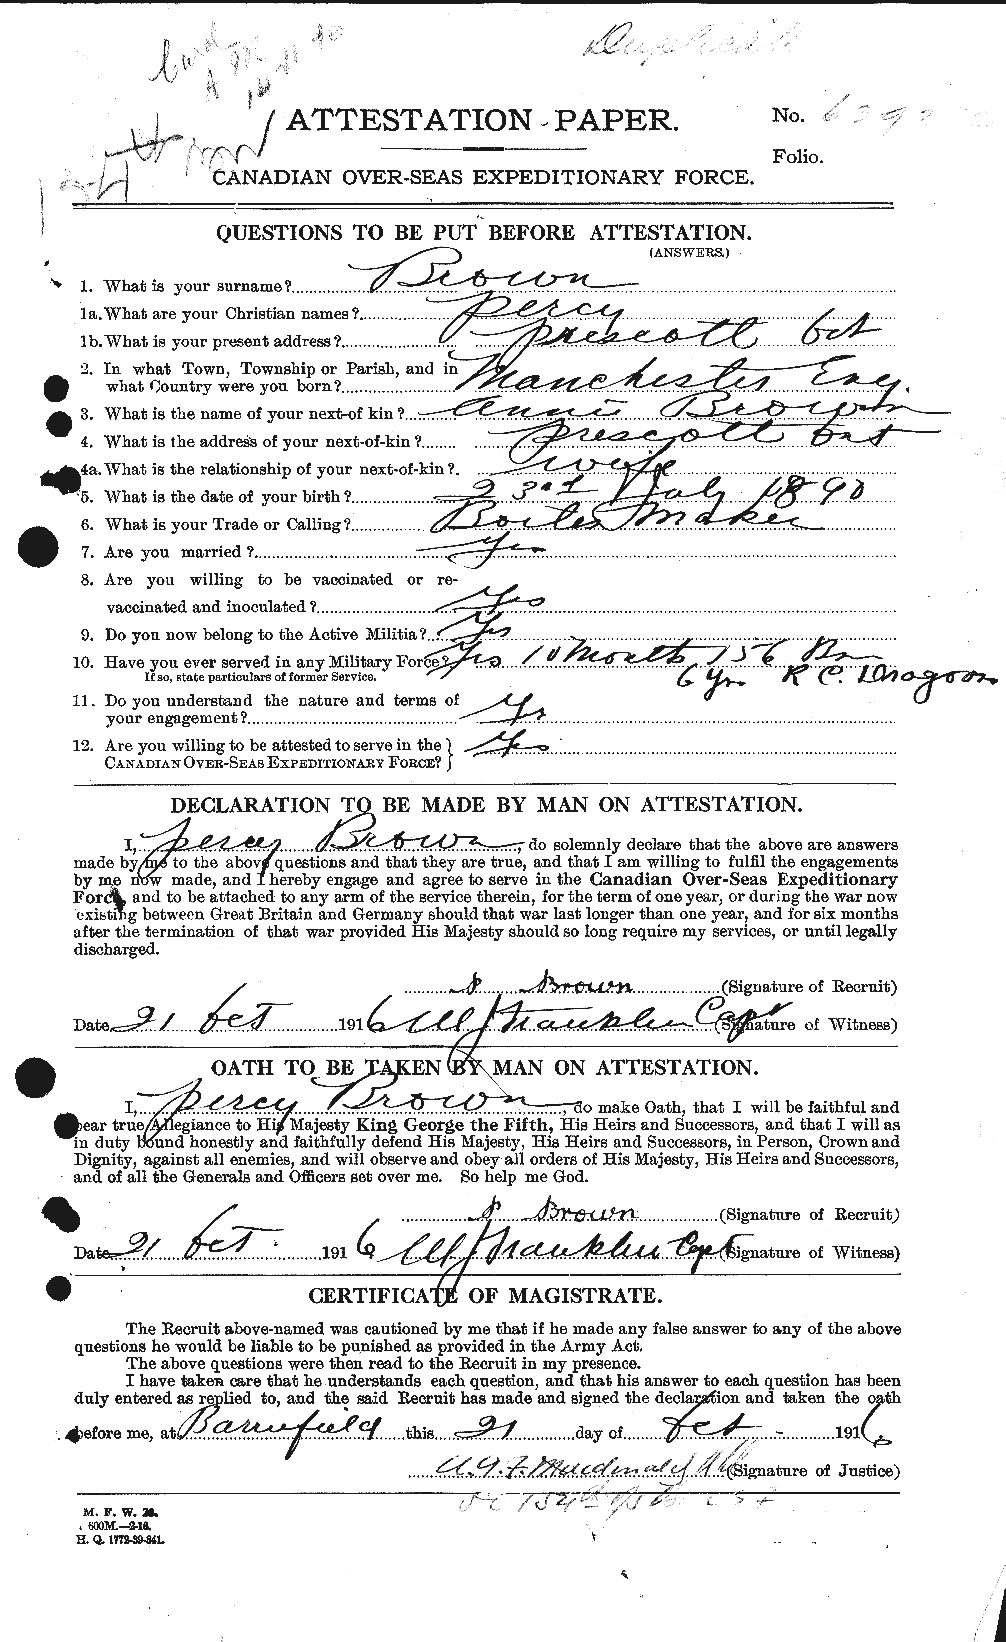 Personnel Records of the First World War - CEF 267158a